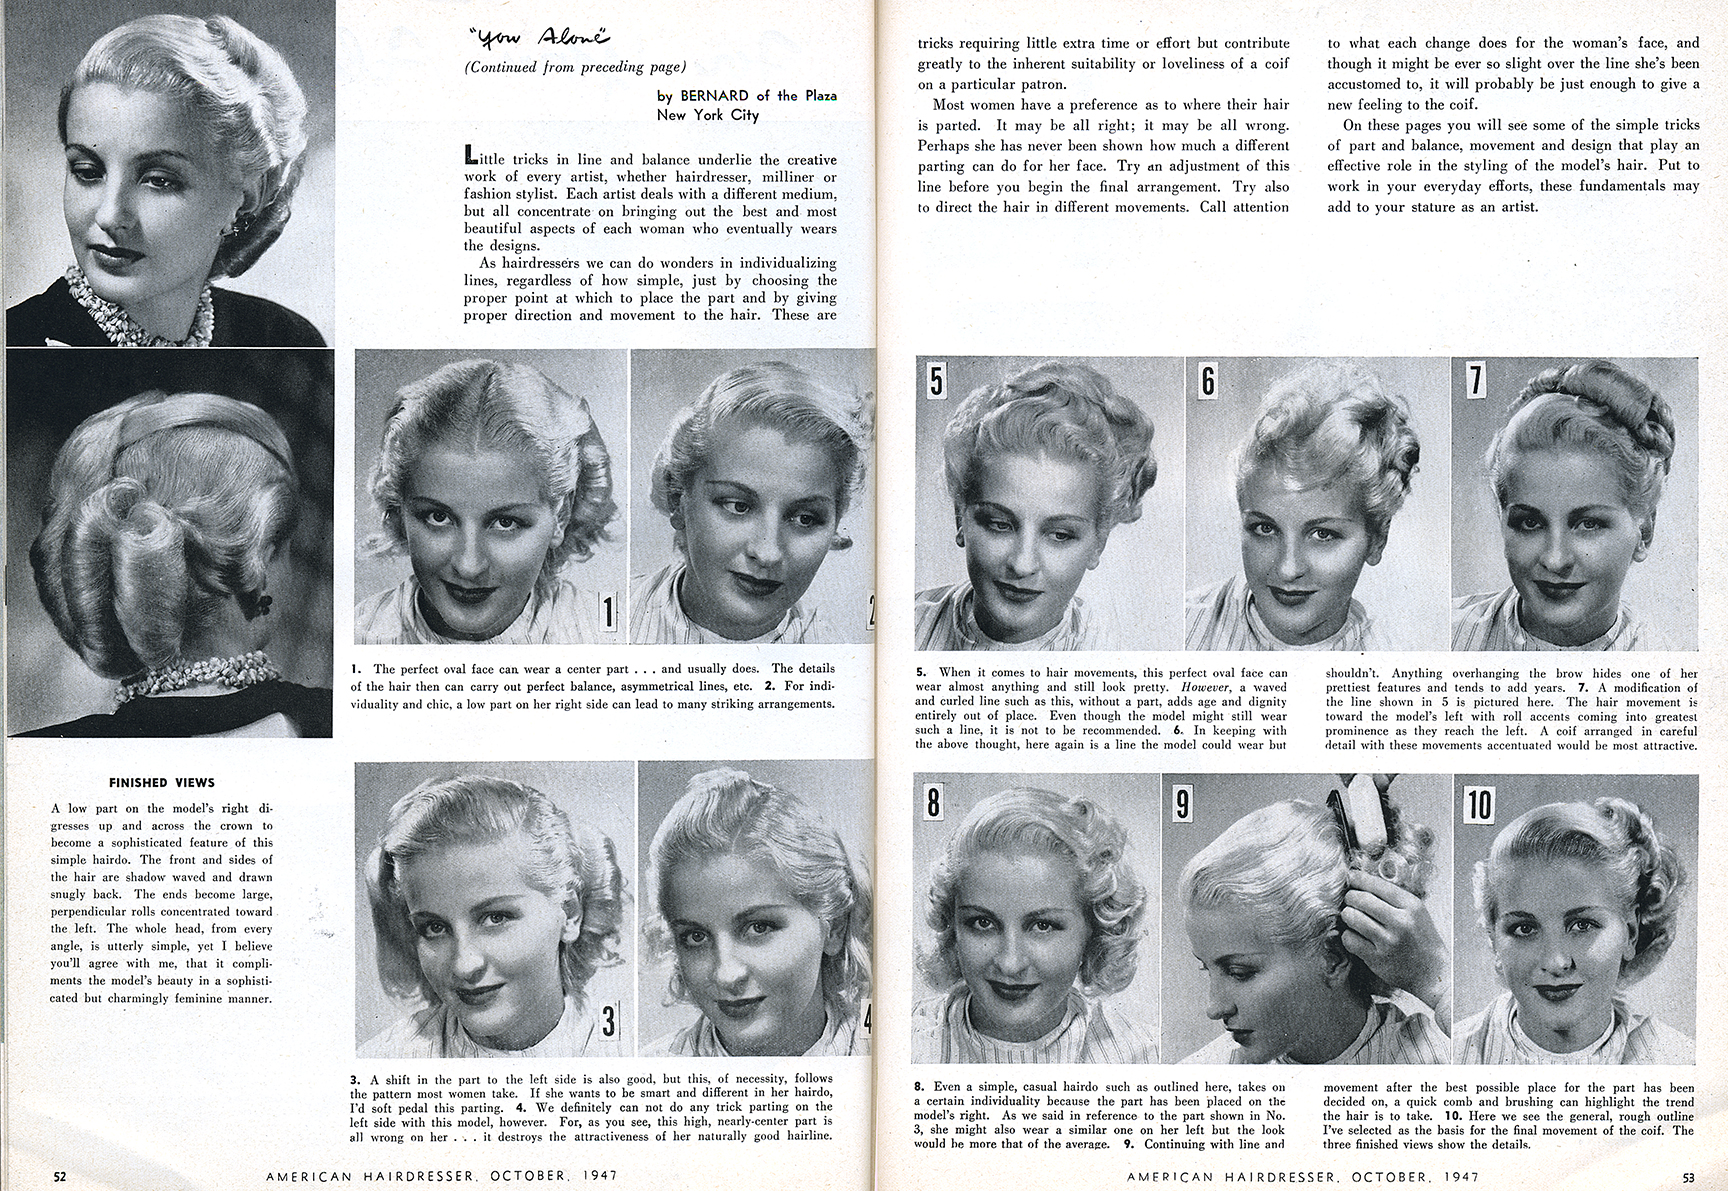 1940s magazine article about hairstyles